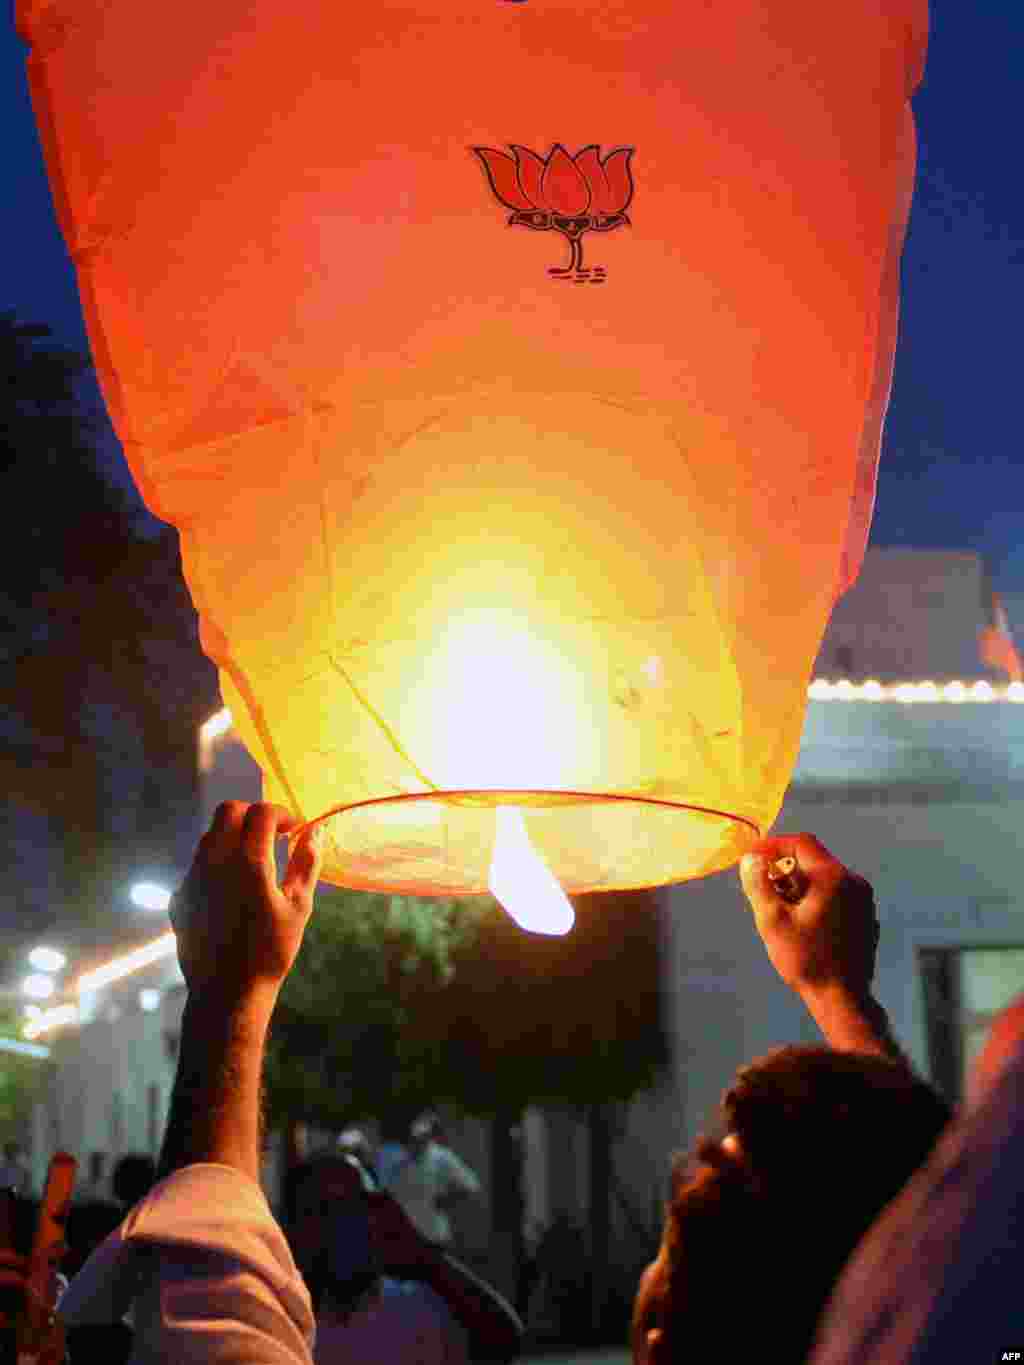 An Indian Bharatiya Janata Party (BJP) supporter prepares to launch a hot air lantern adorned with the BJP lotus party symbol at the party headquarters in New Delhi.